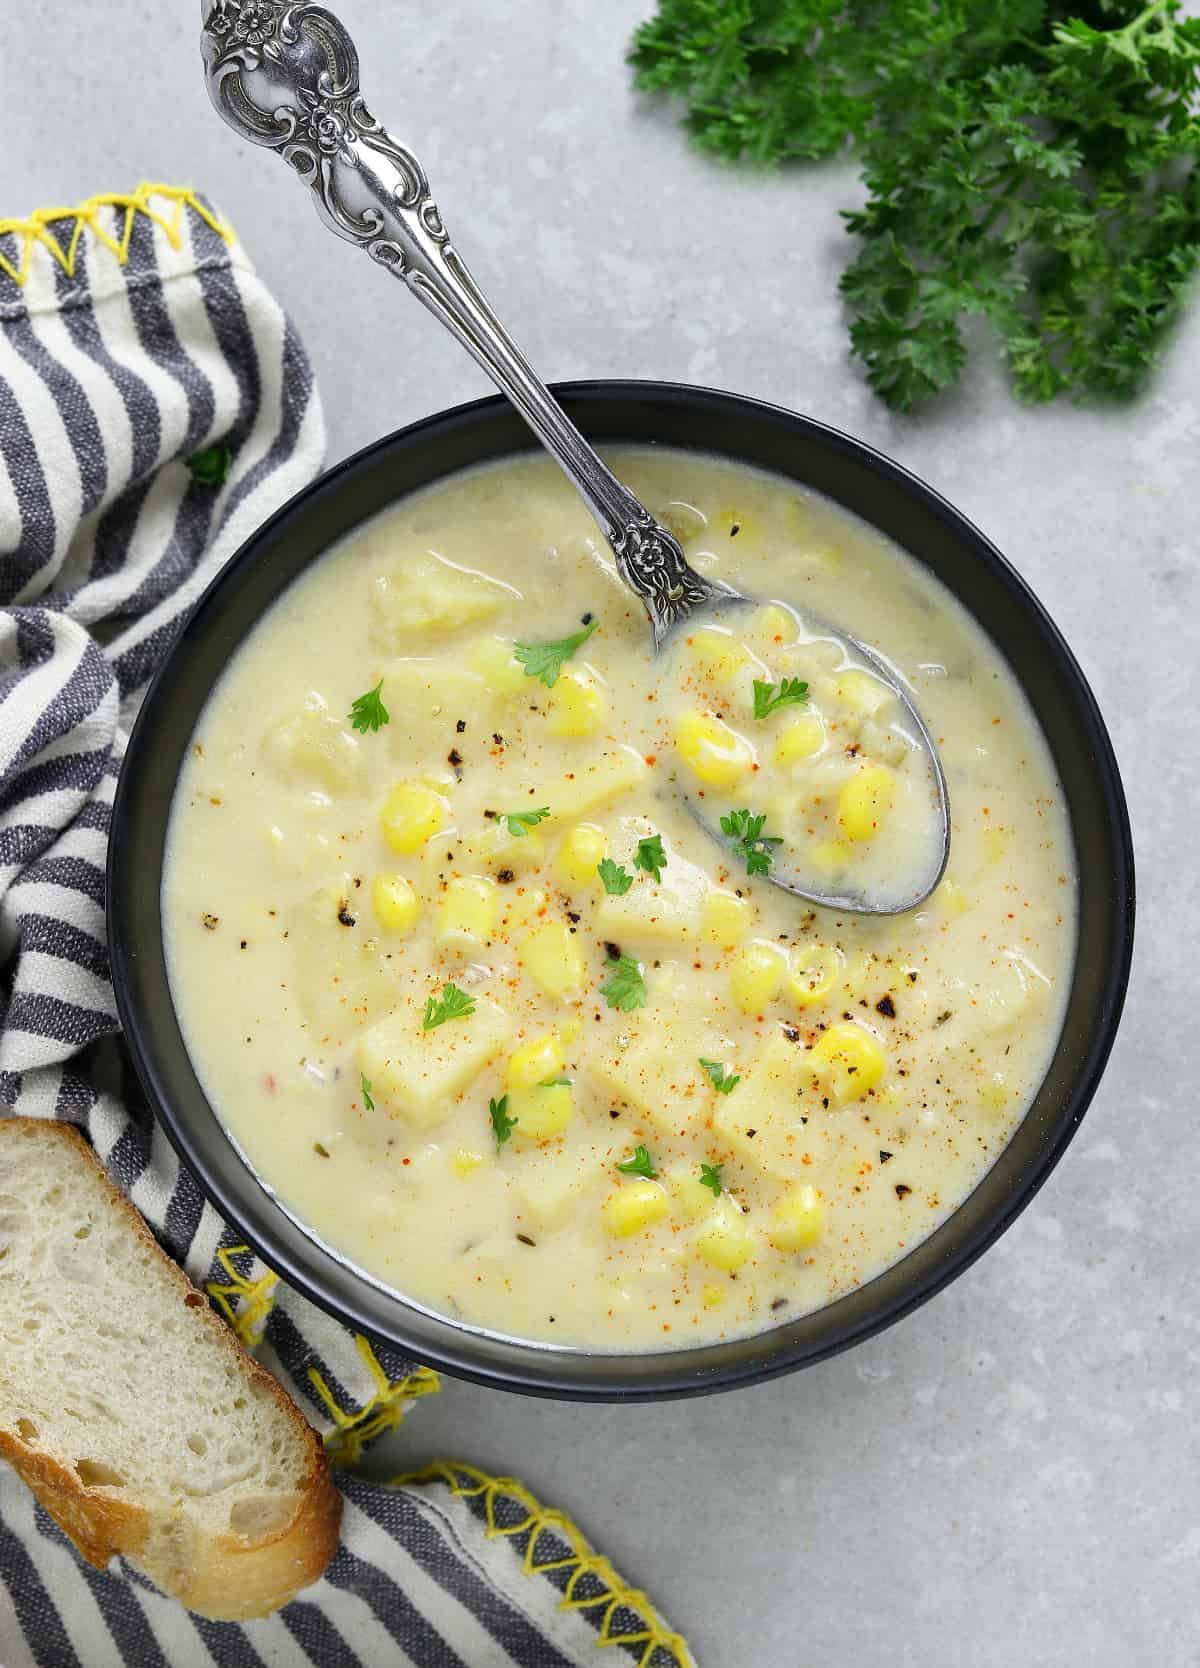 Overhead view of corn chowder in a black bowl with a spoon inside. Bread and parsley on the side.